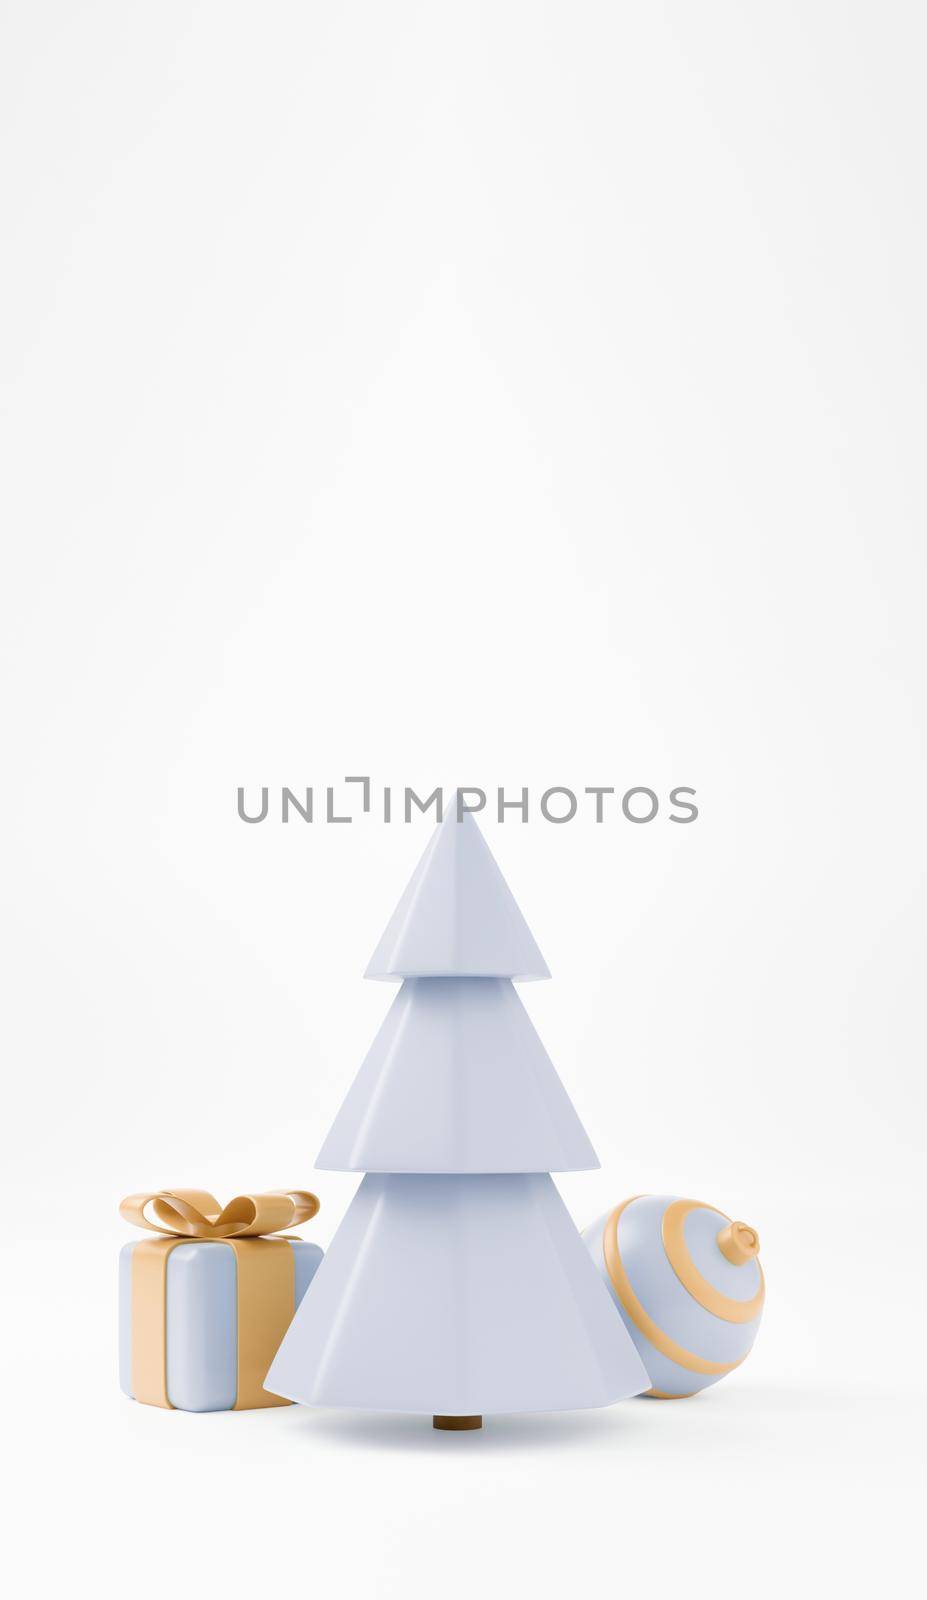 3d Christmas tree with gift box and ball vertical background, xmas poster, web banner. 3d illustration minimal style christmas and new year concept by lunarts